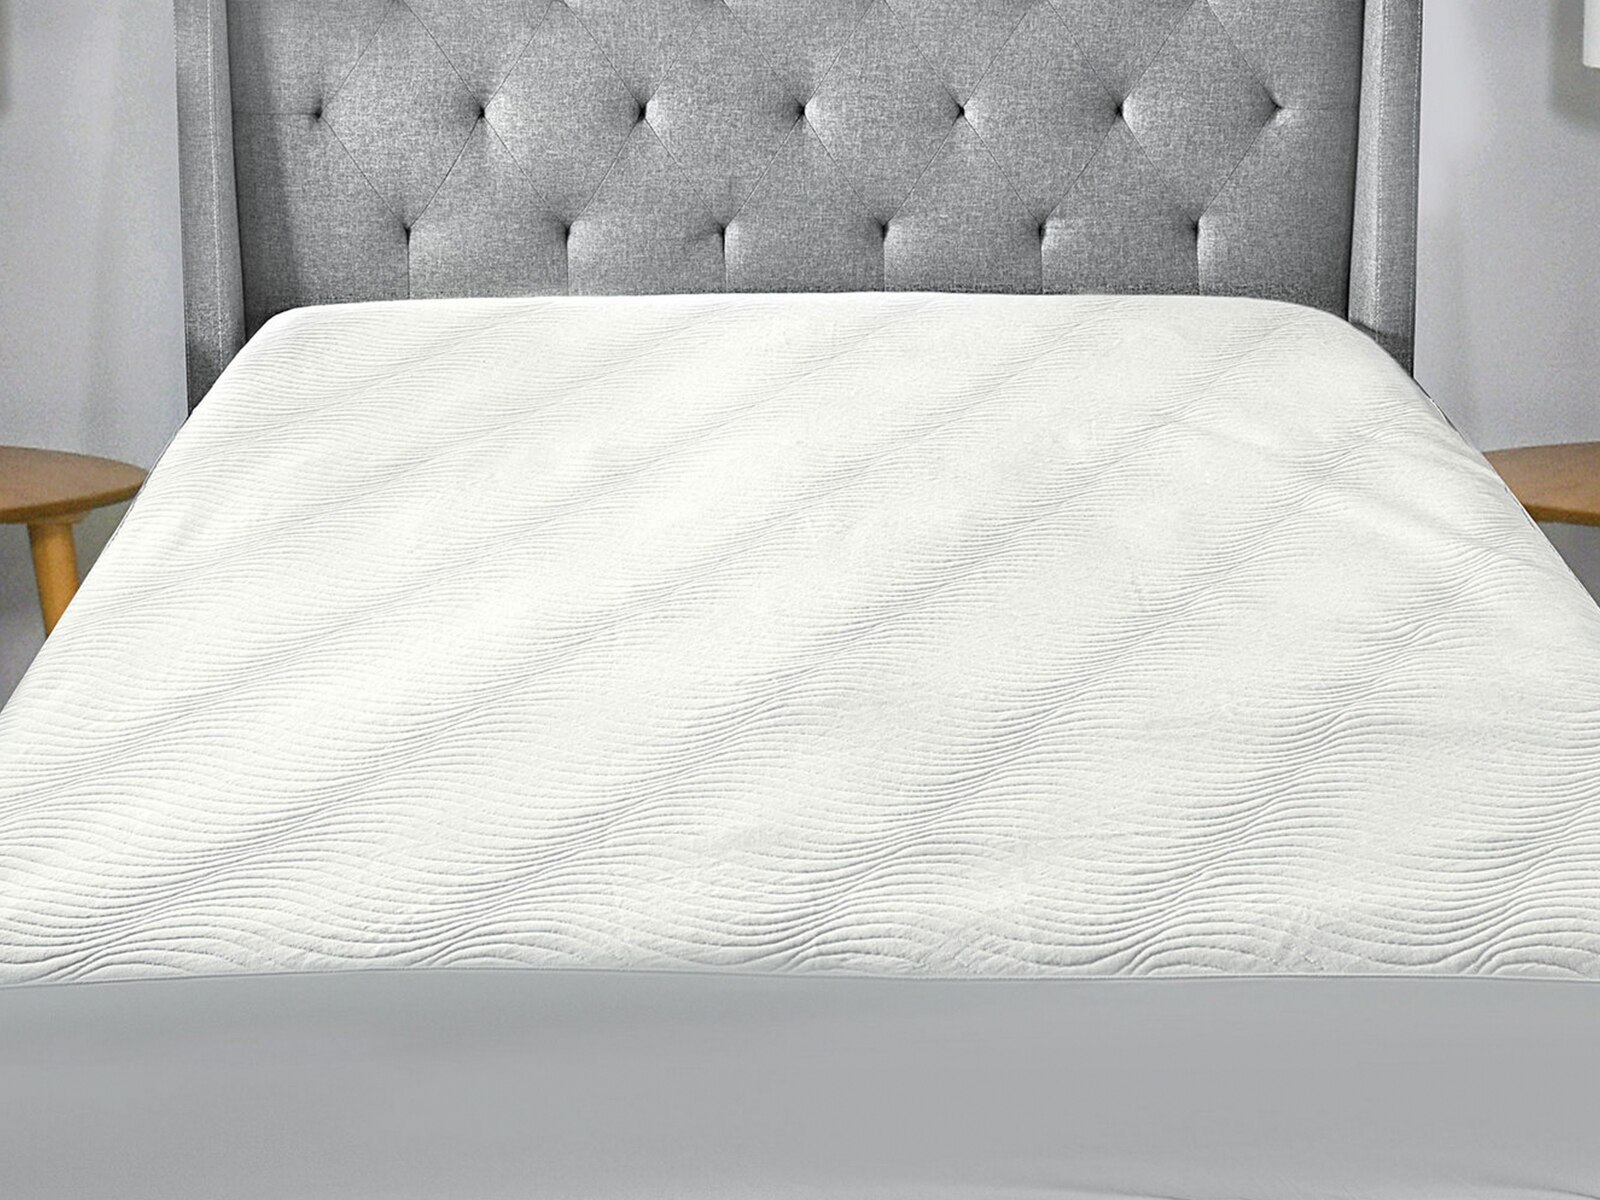 sealy luxury hotel collection mattress review